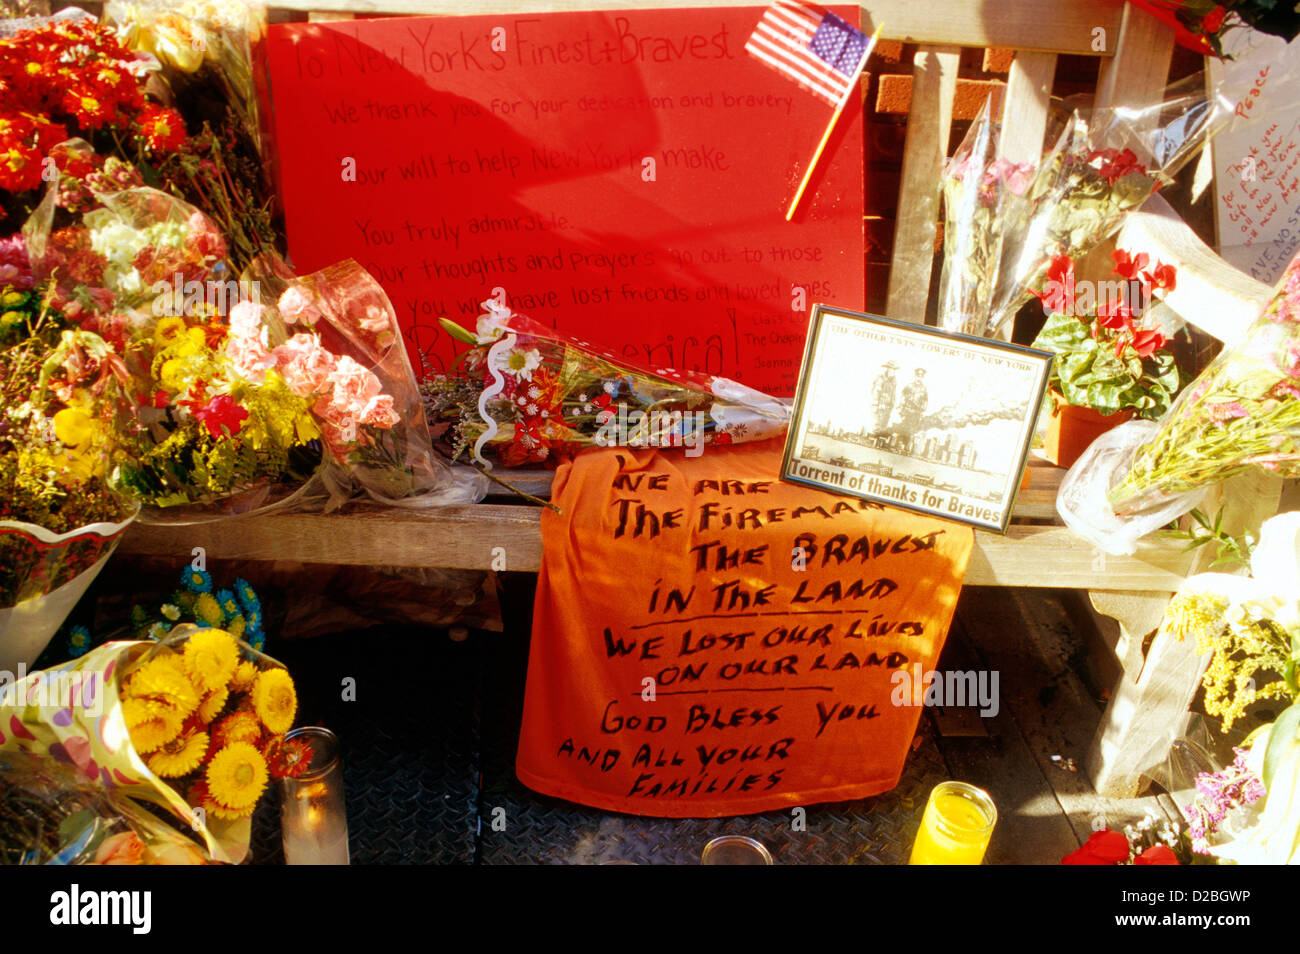 New York City, 9/11/2001. Memorial Thanking Firefighters Following World Trade Center Attack. Stock Photo